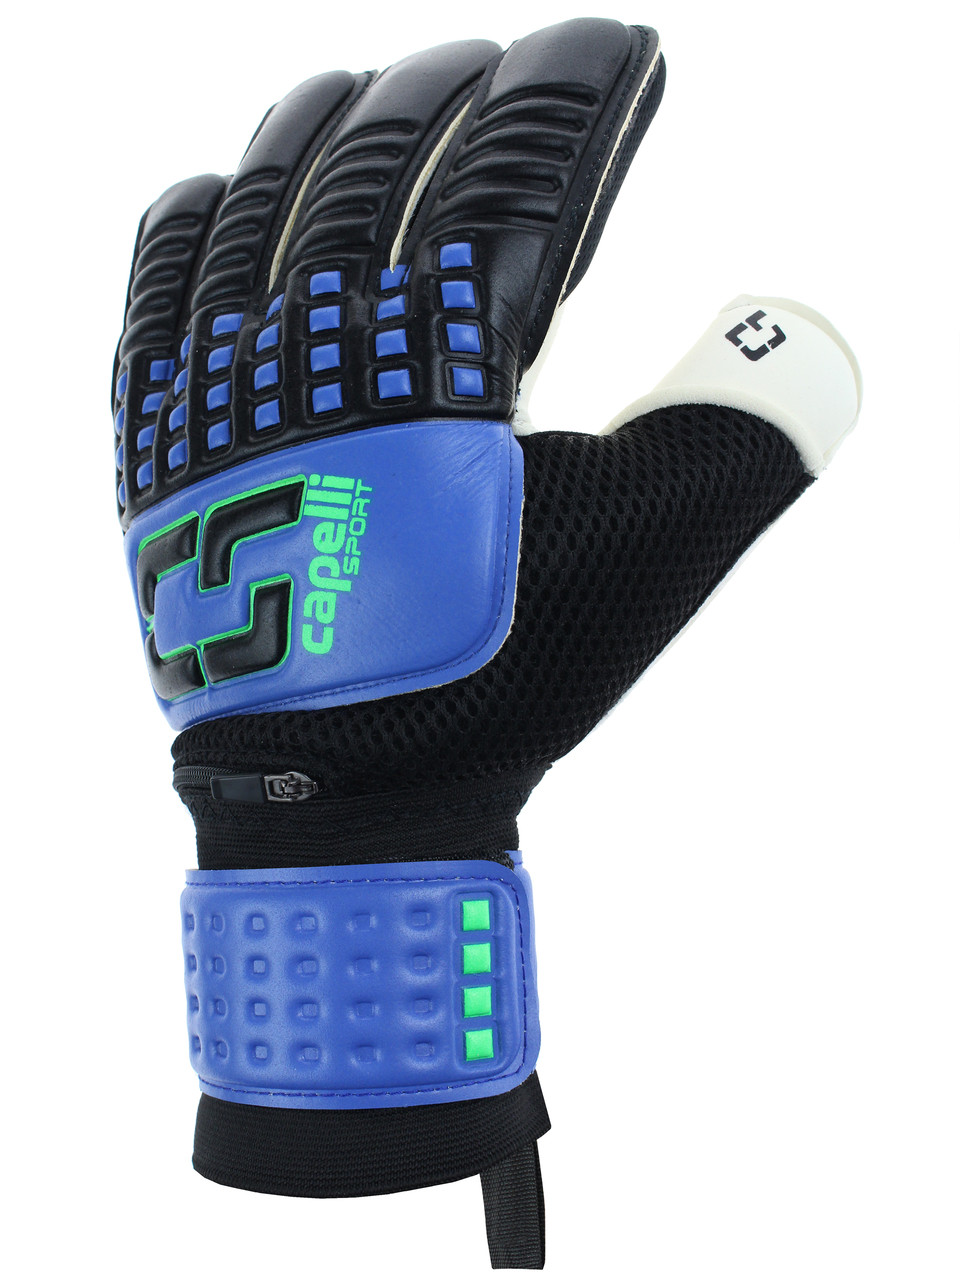 CS 4 CUBE COMPETITION ELITE YOUTH GOALKEEPER GLOVE WITH FINGER PROTECTION--  PROMO BLUE NEON GREEN BLACK - Capelli Sport